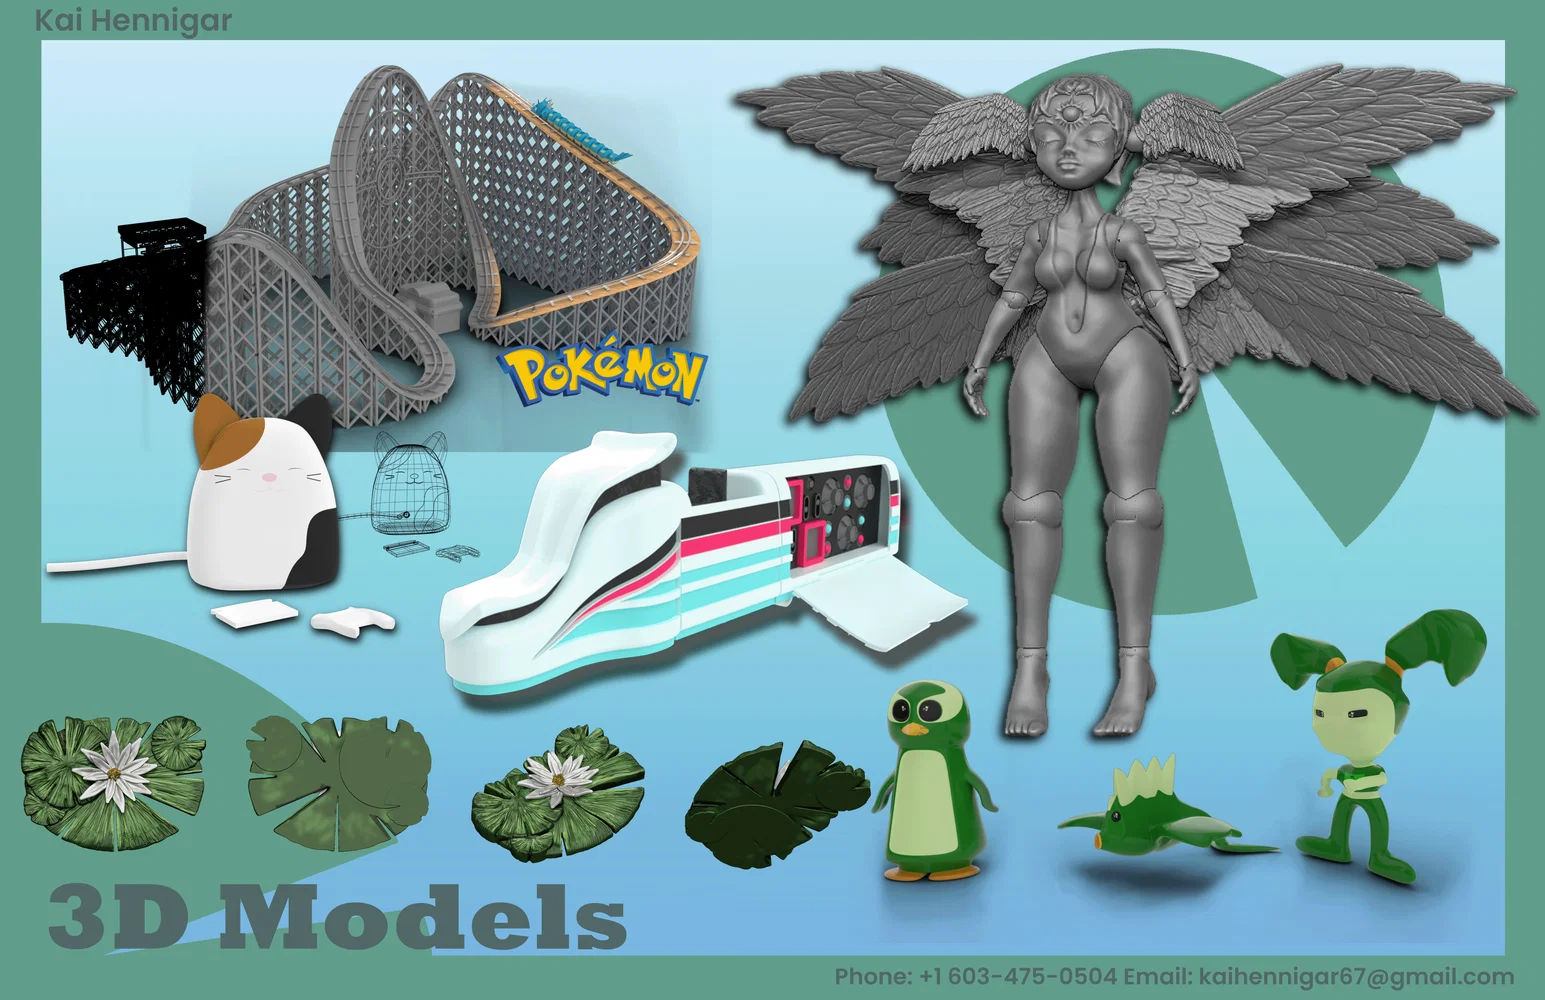 8 3D modeled designs; a pokemon themed amusement ride, a squishable themed video game station, a hatsune miku themed train, an angel character, a water lily on three lily pads, a penguin, a fish, and a girl with pigtails